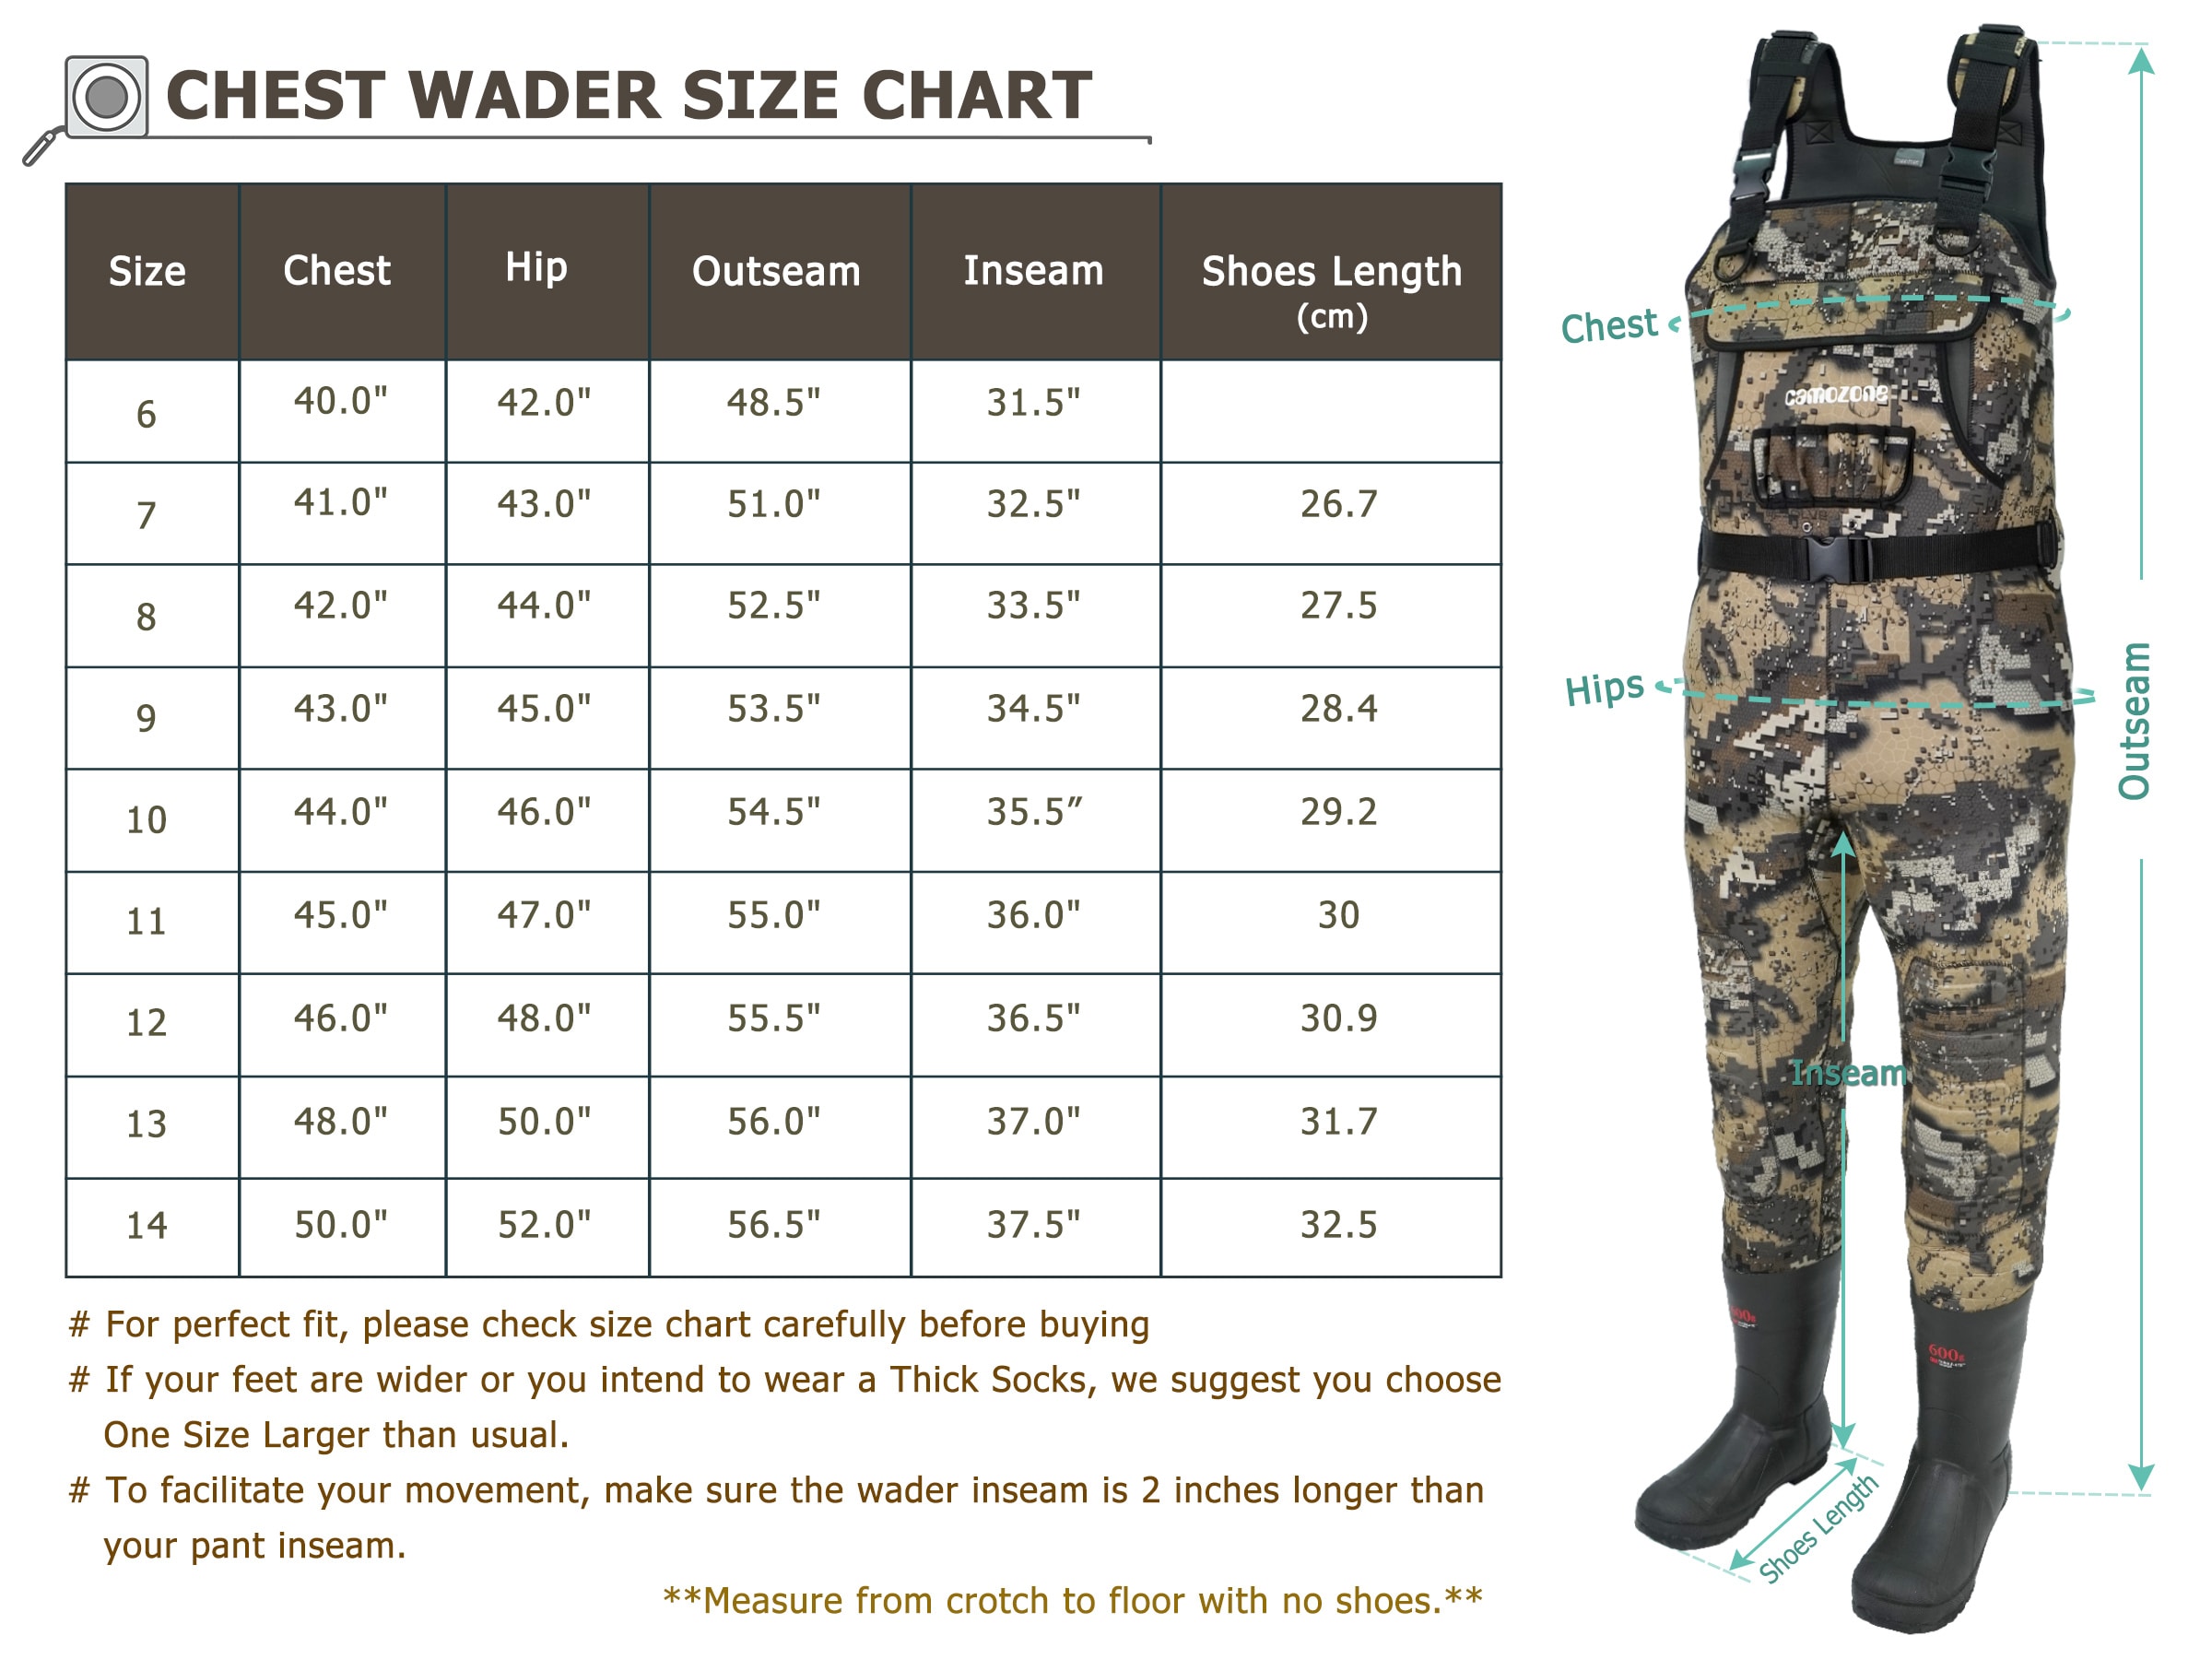 CAMOZONE Neoprene Chest Waders with Boots-size10 Unisex Fishing